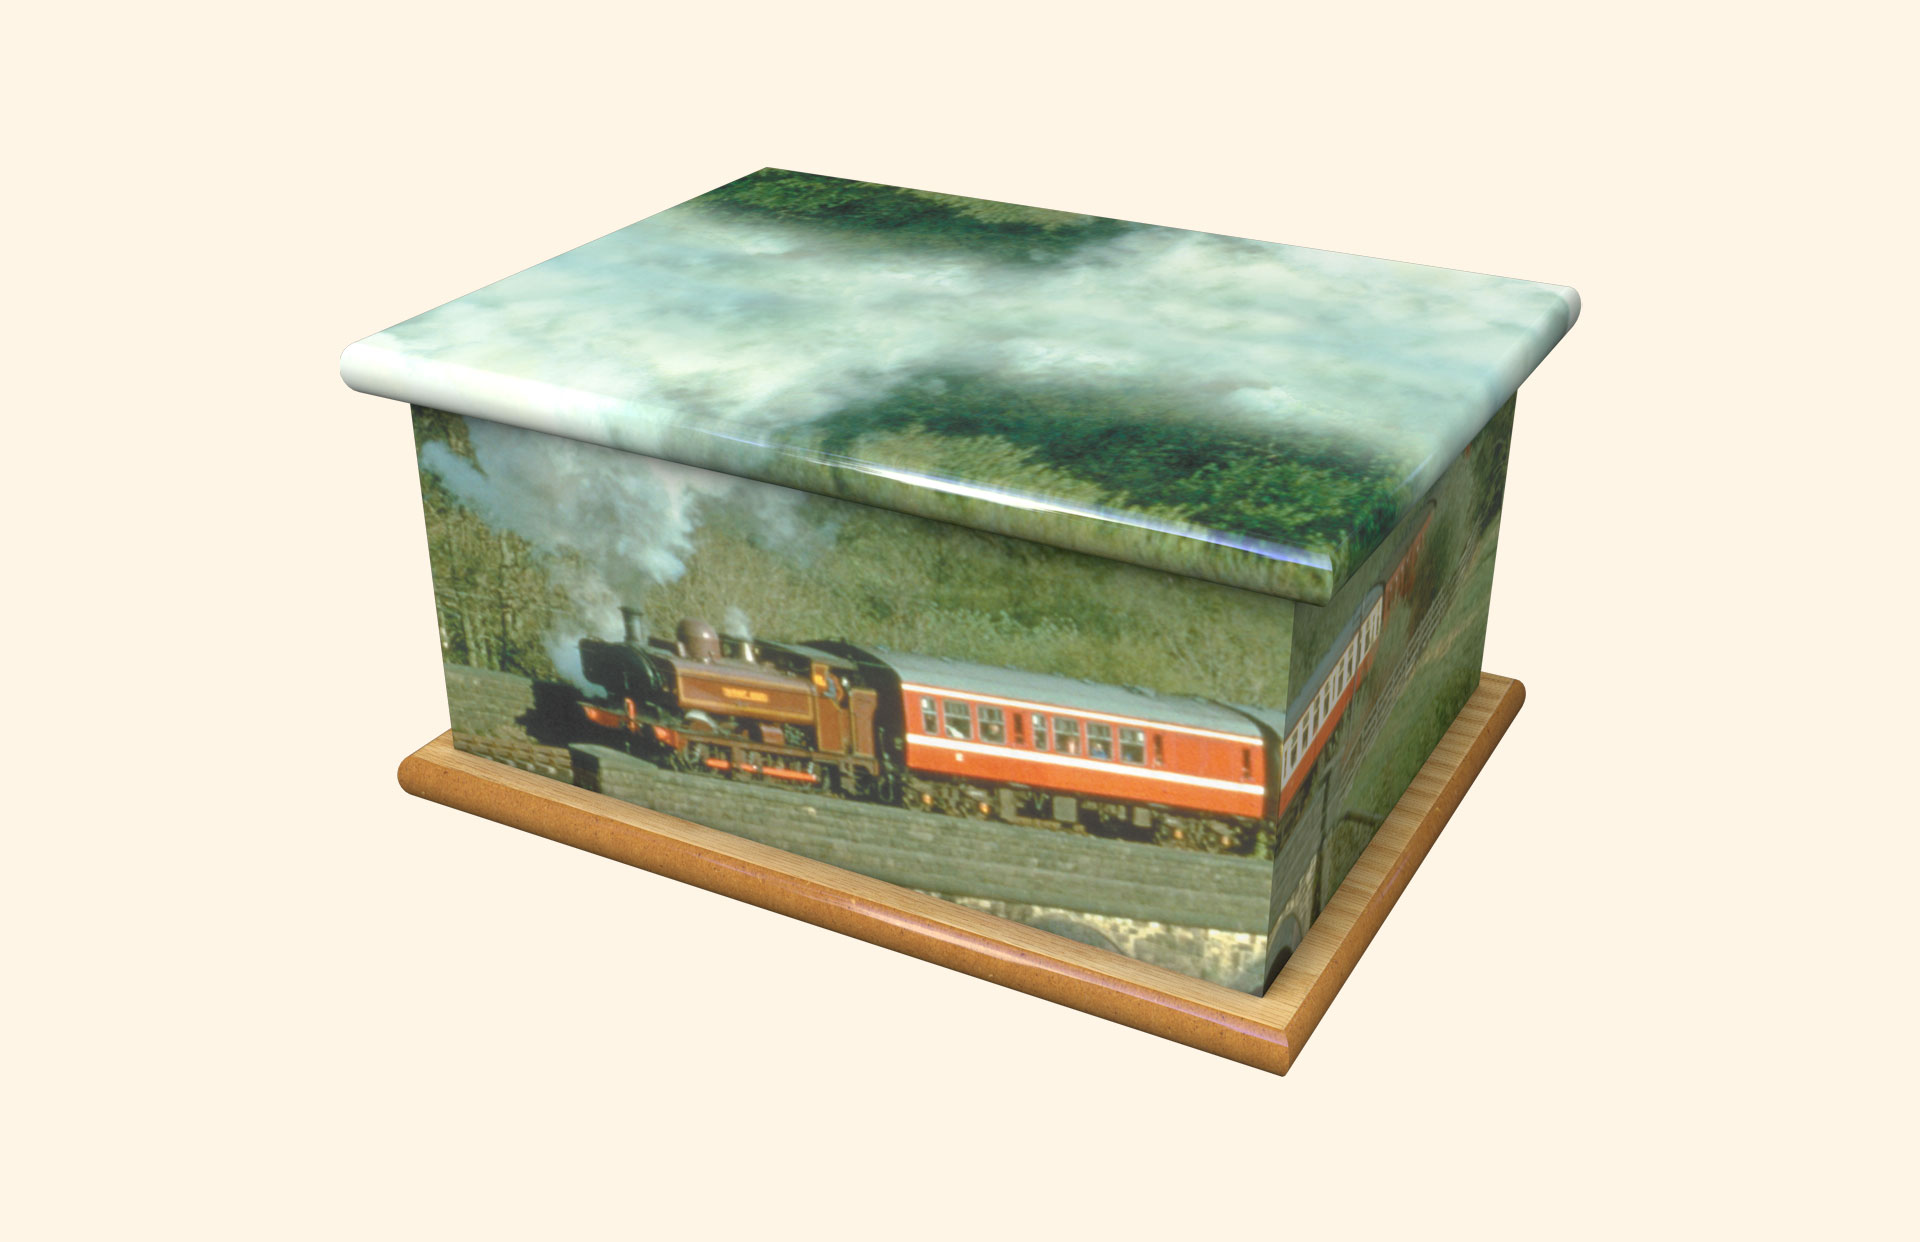 The Journey adult ashes casket